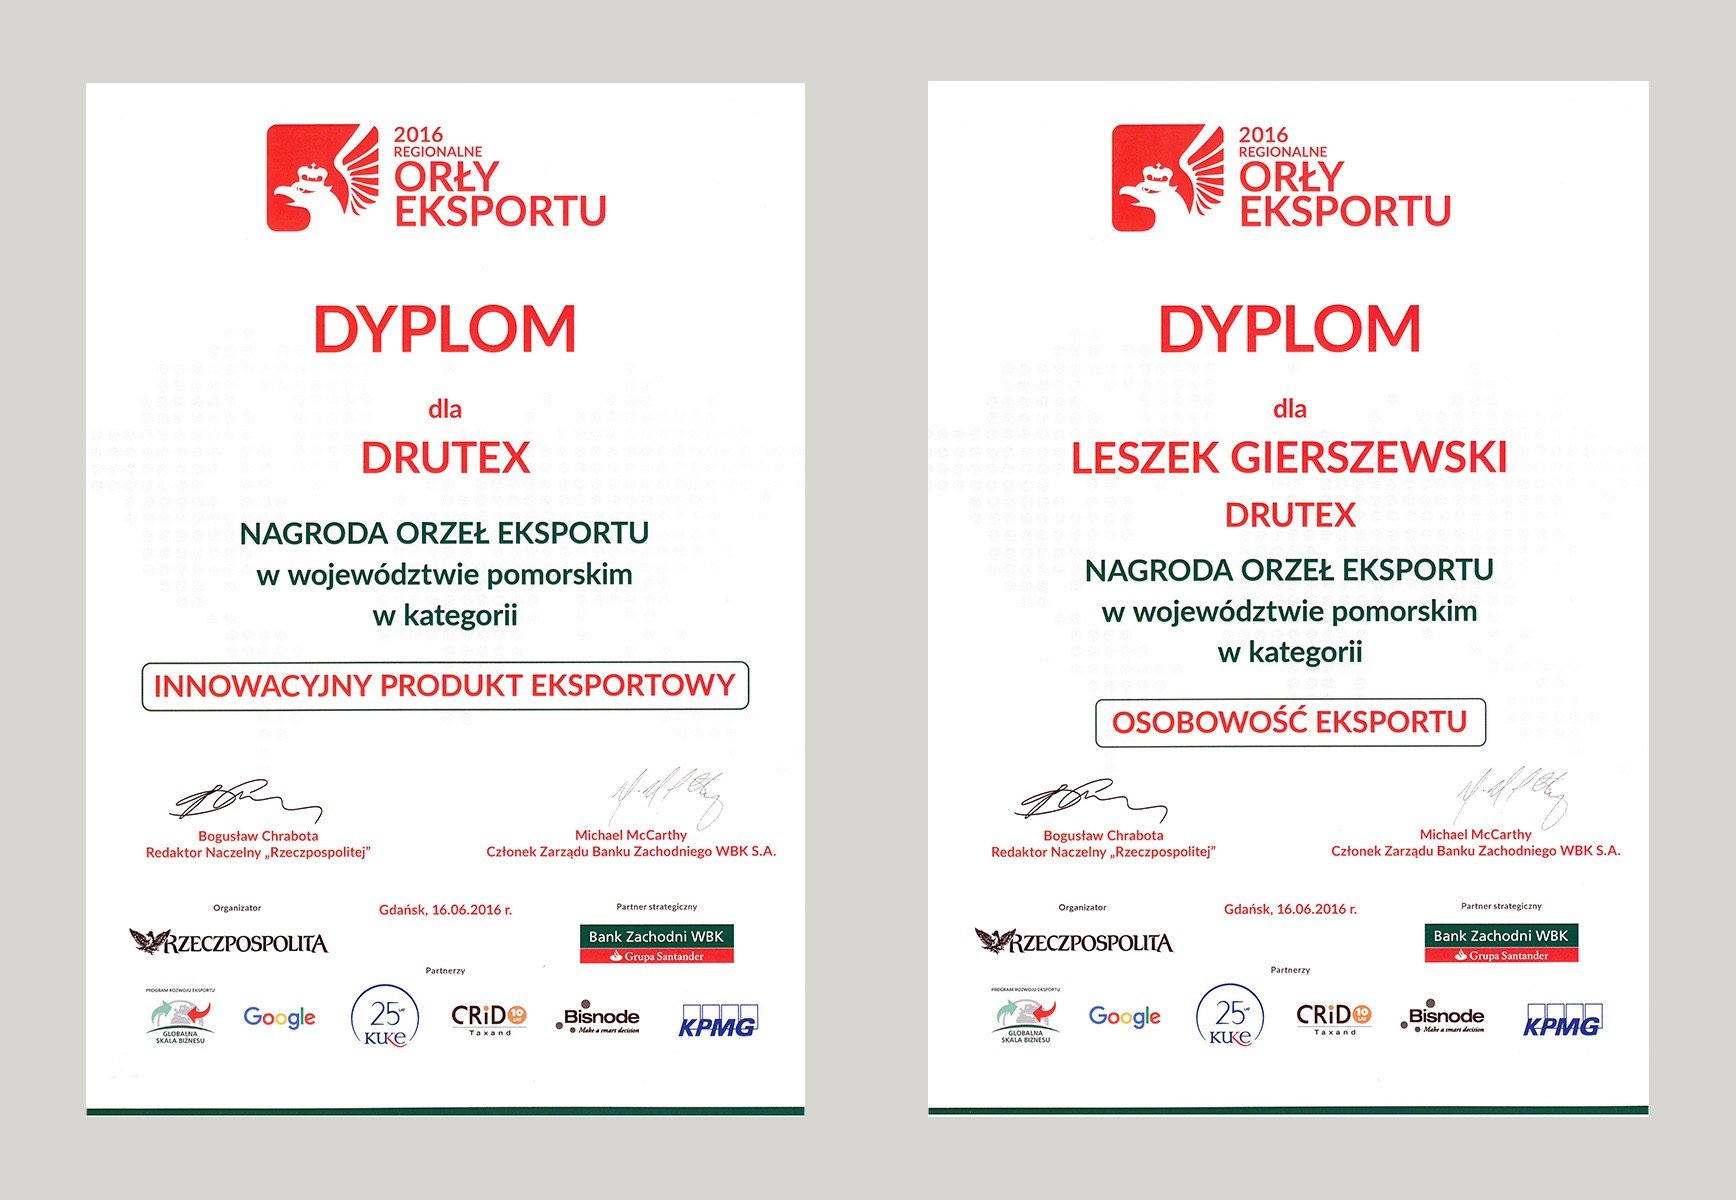 EAGLES OF EXPORT FOR DRUTEX S.A. AND FOR THE PRESIDENT LESZEK GIERSZEWSKI!